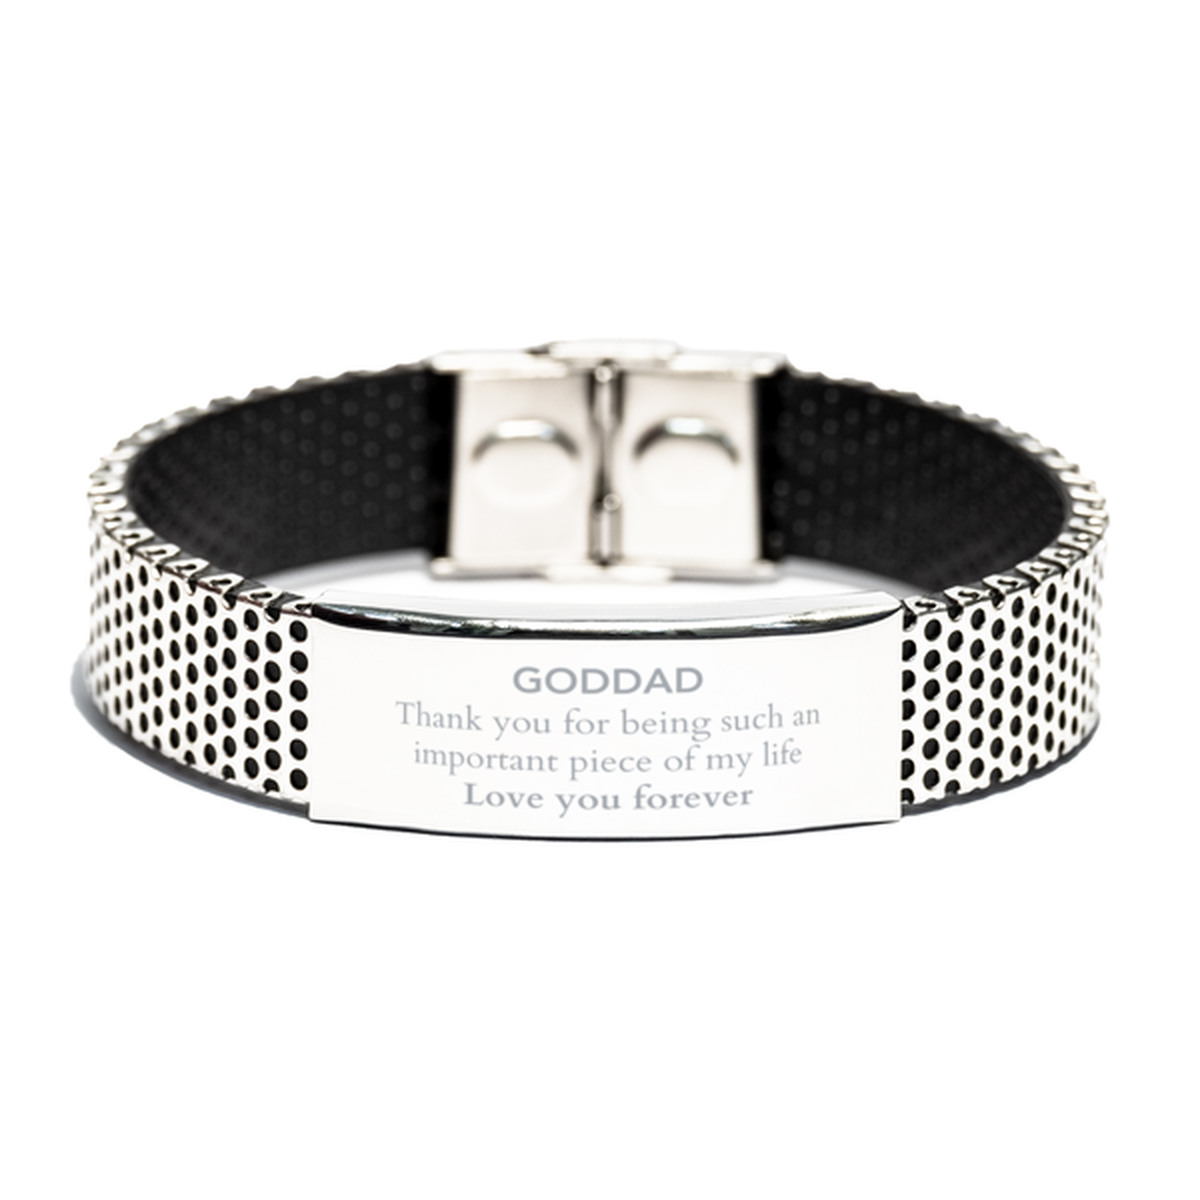 Appropriate Goddad Stainless Steel Bracelet Epic Birthday Gifts for Goddad Thank you for being such an important piece of my life Goddad Christmas Mothers Fathers Day